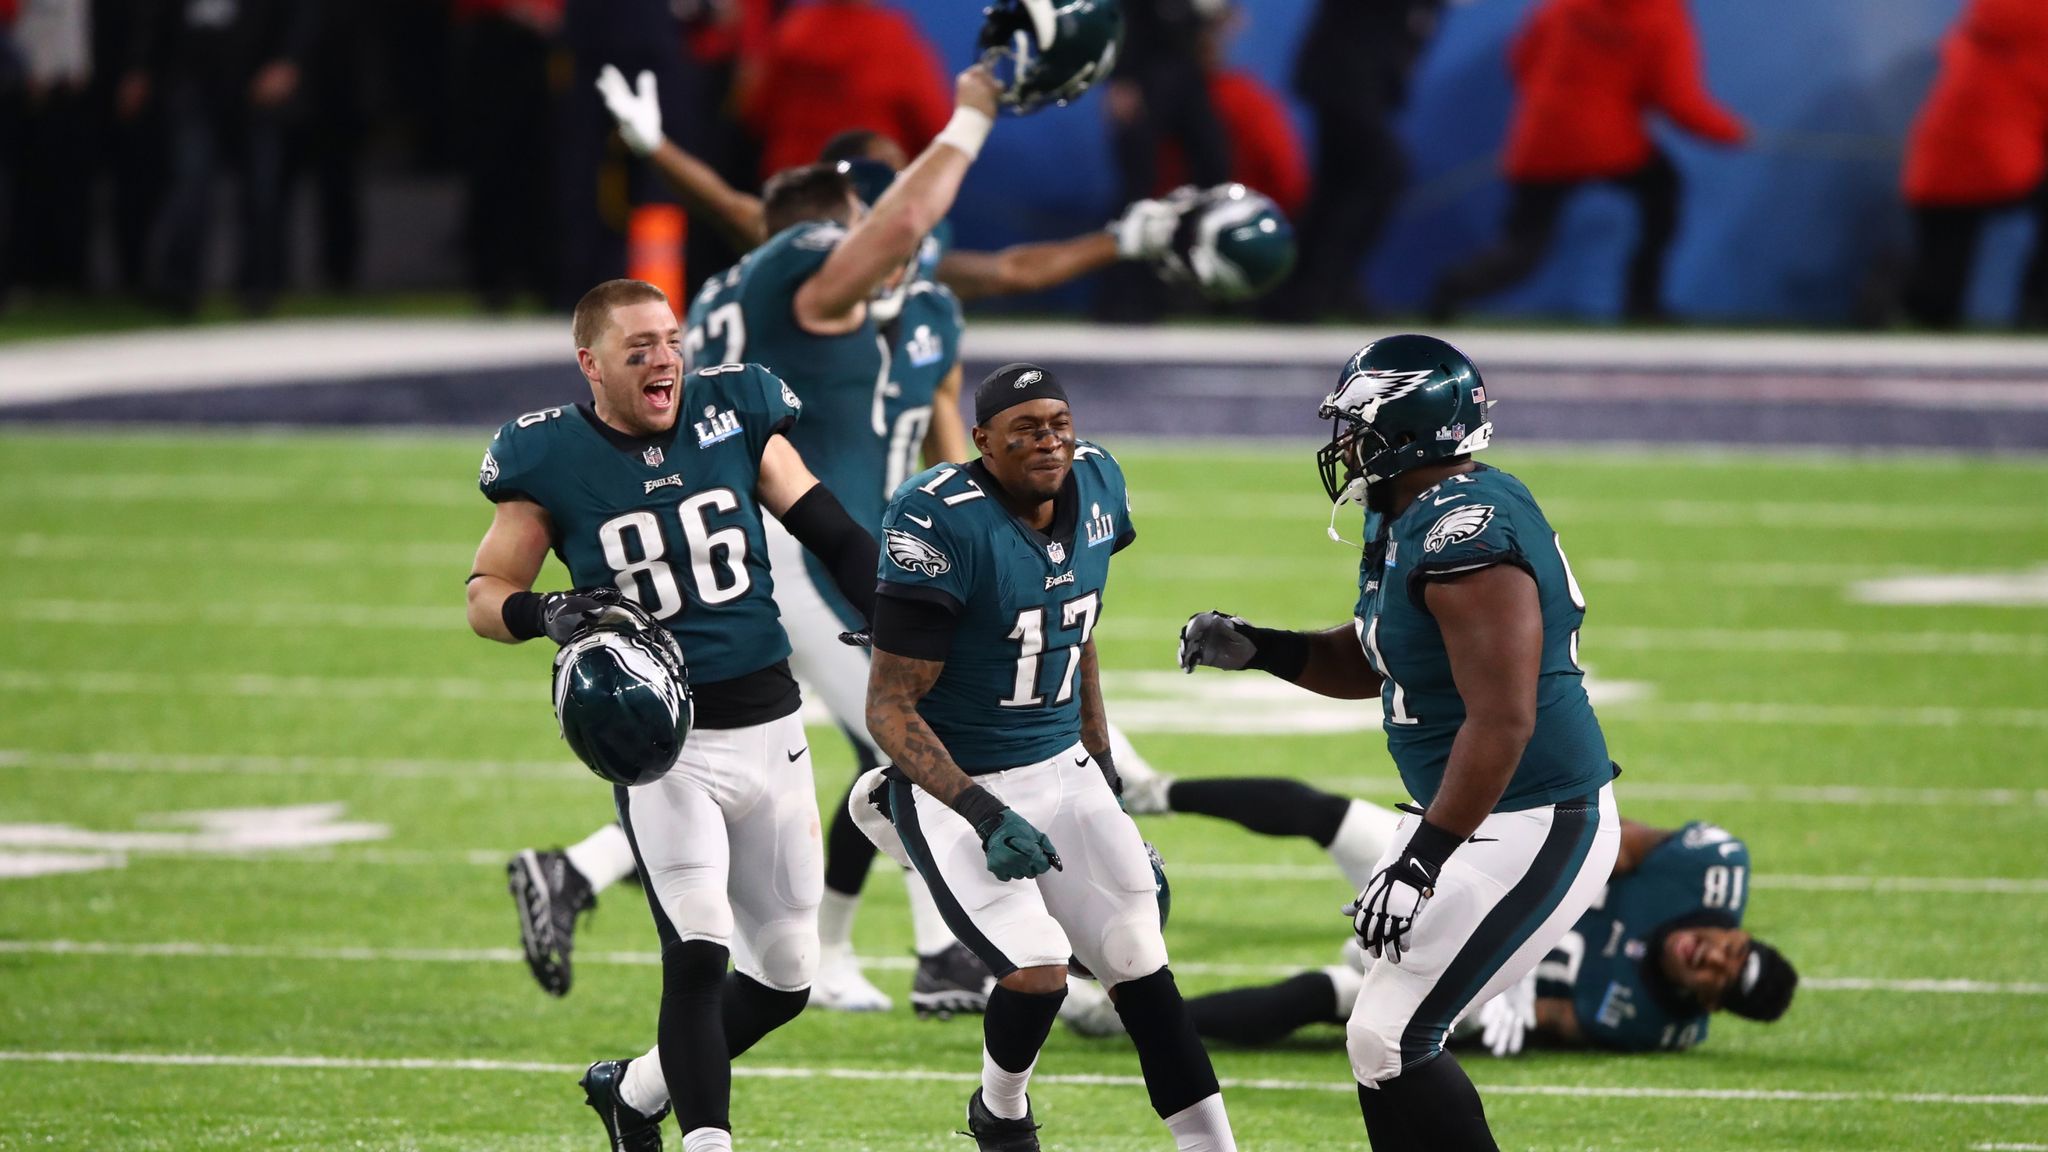 Eagles topple mighty Patriots, 41-33, to win first Super Bowl